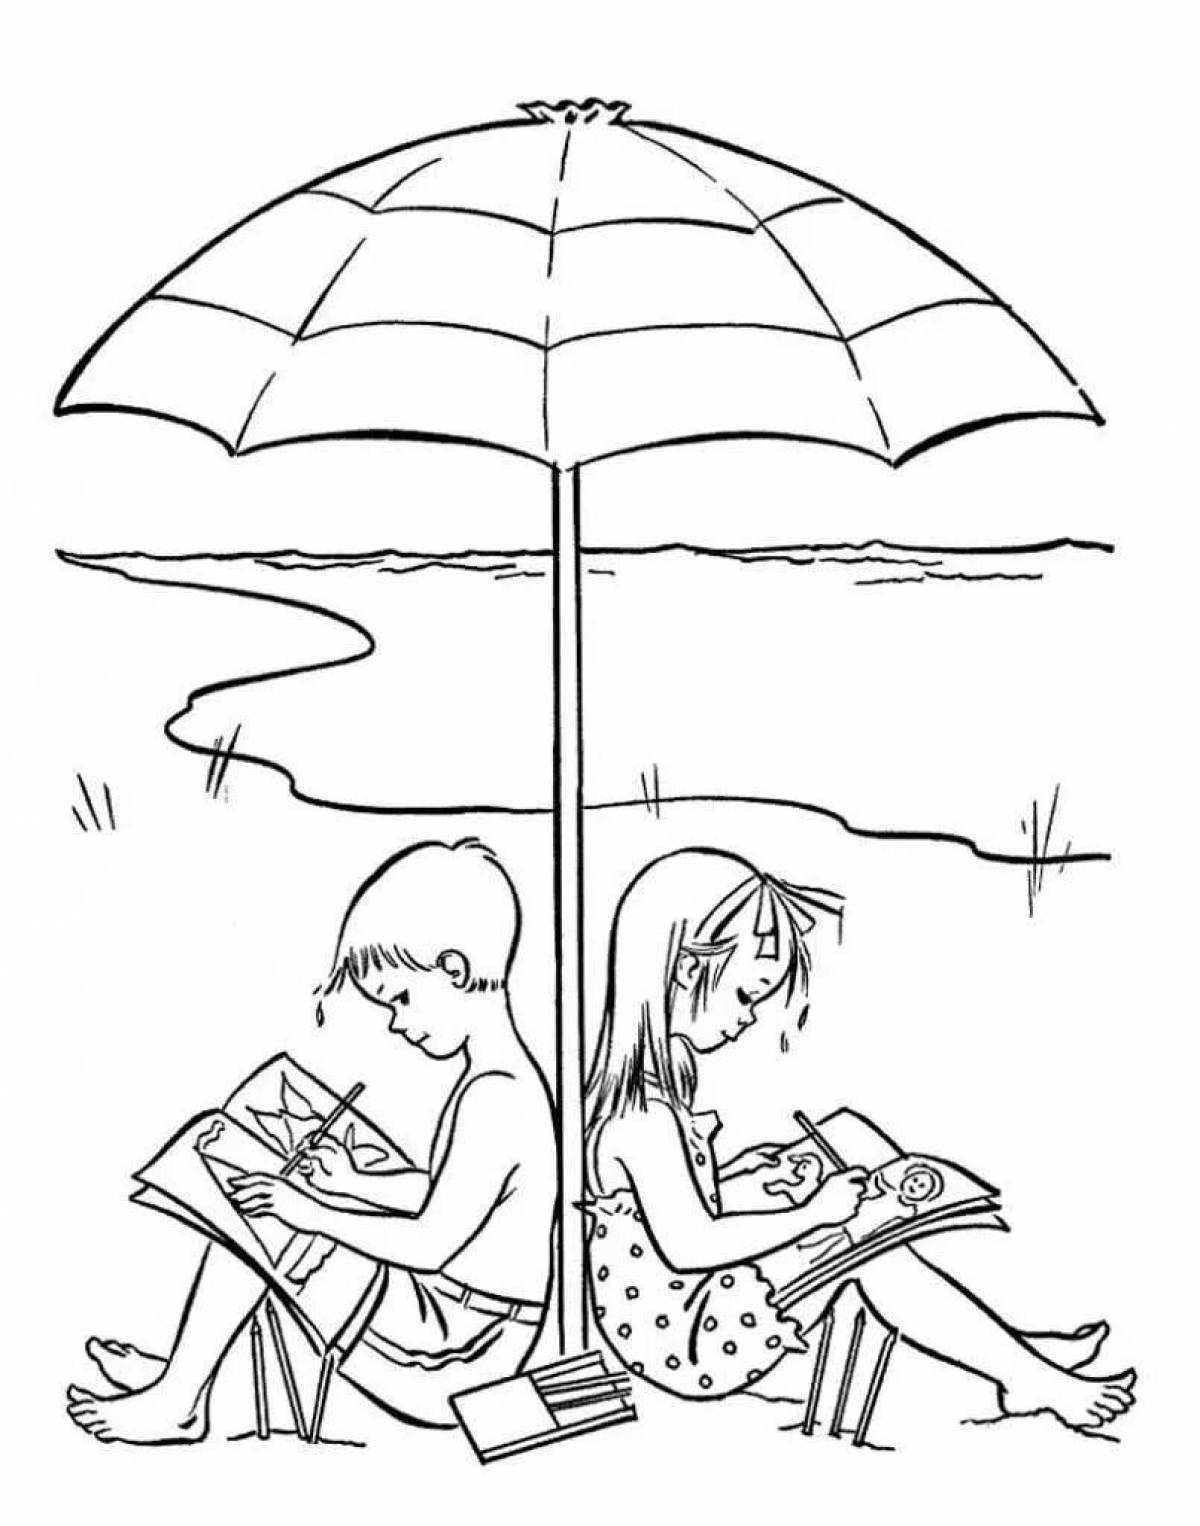 Inviting coloring page